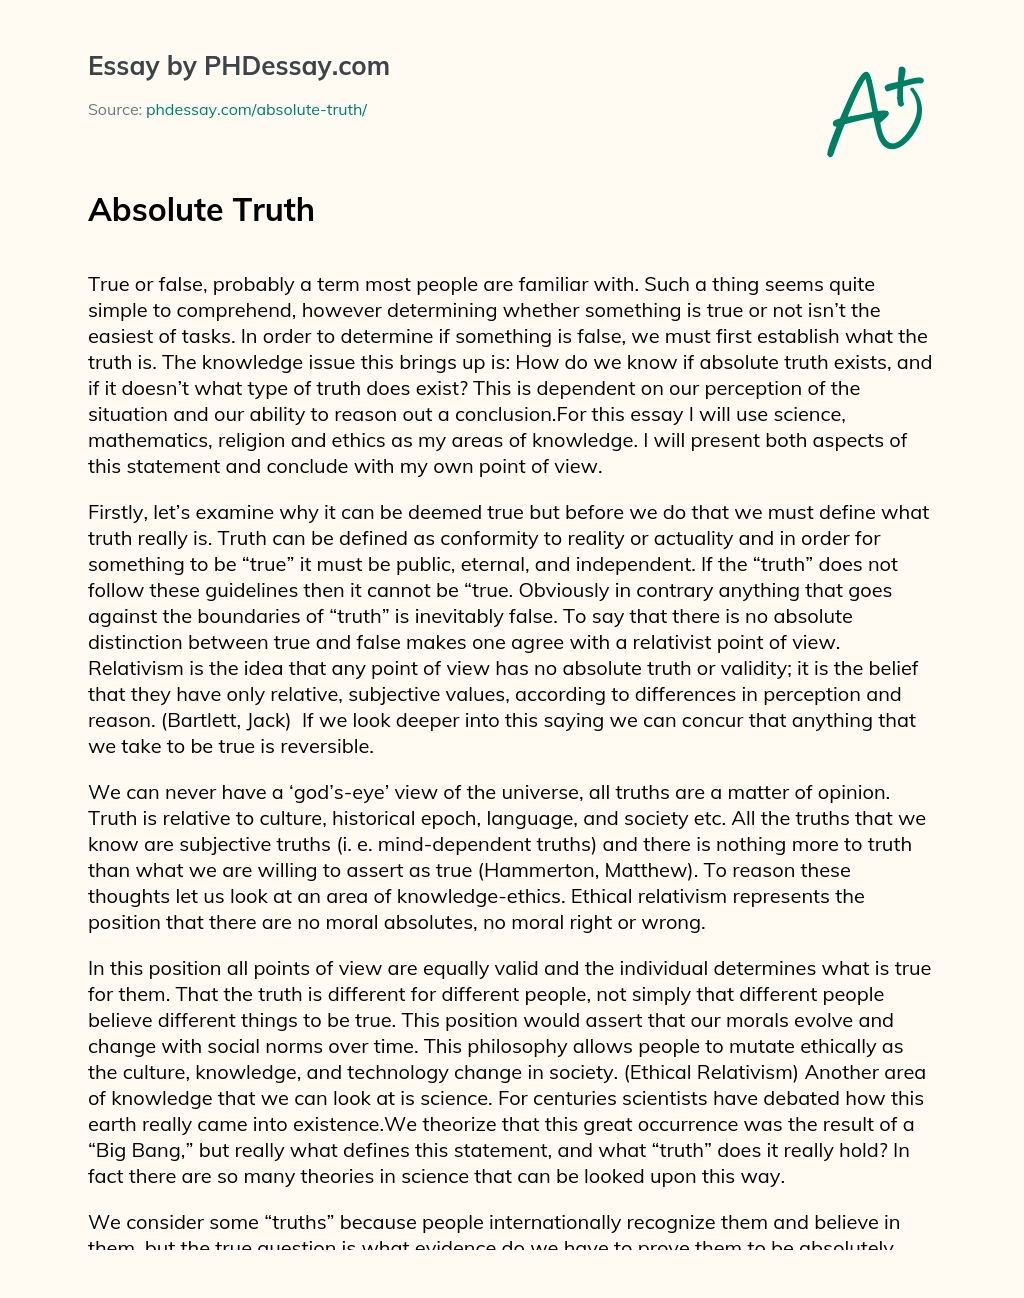 Absolute Truth essay